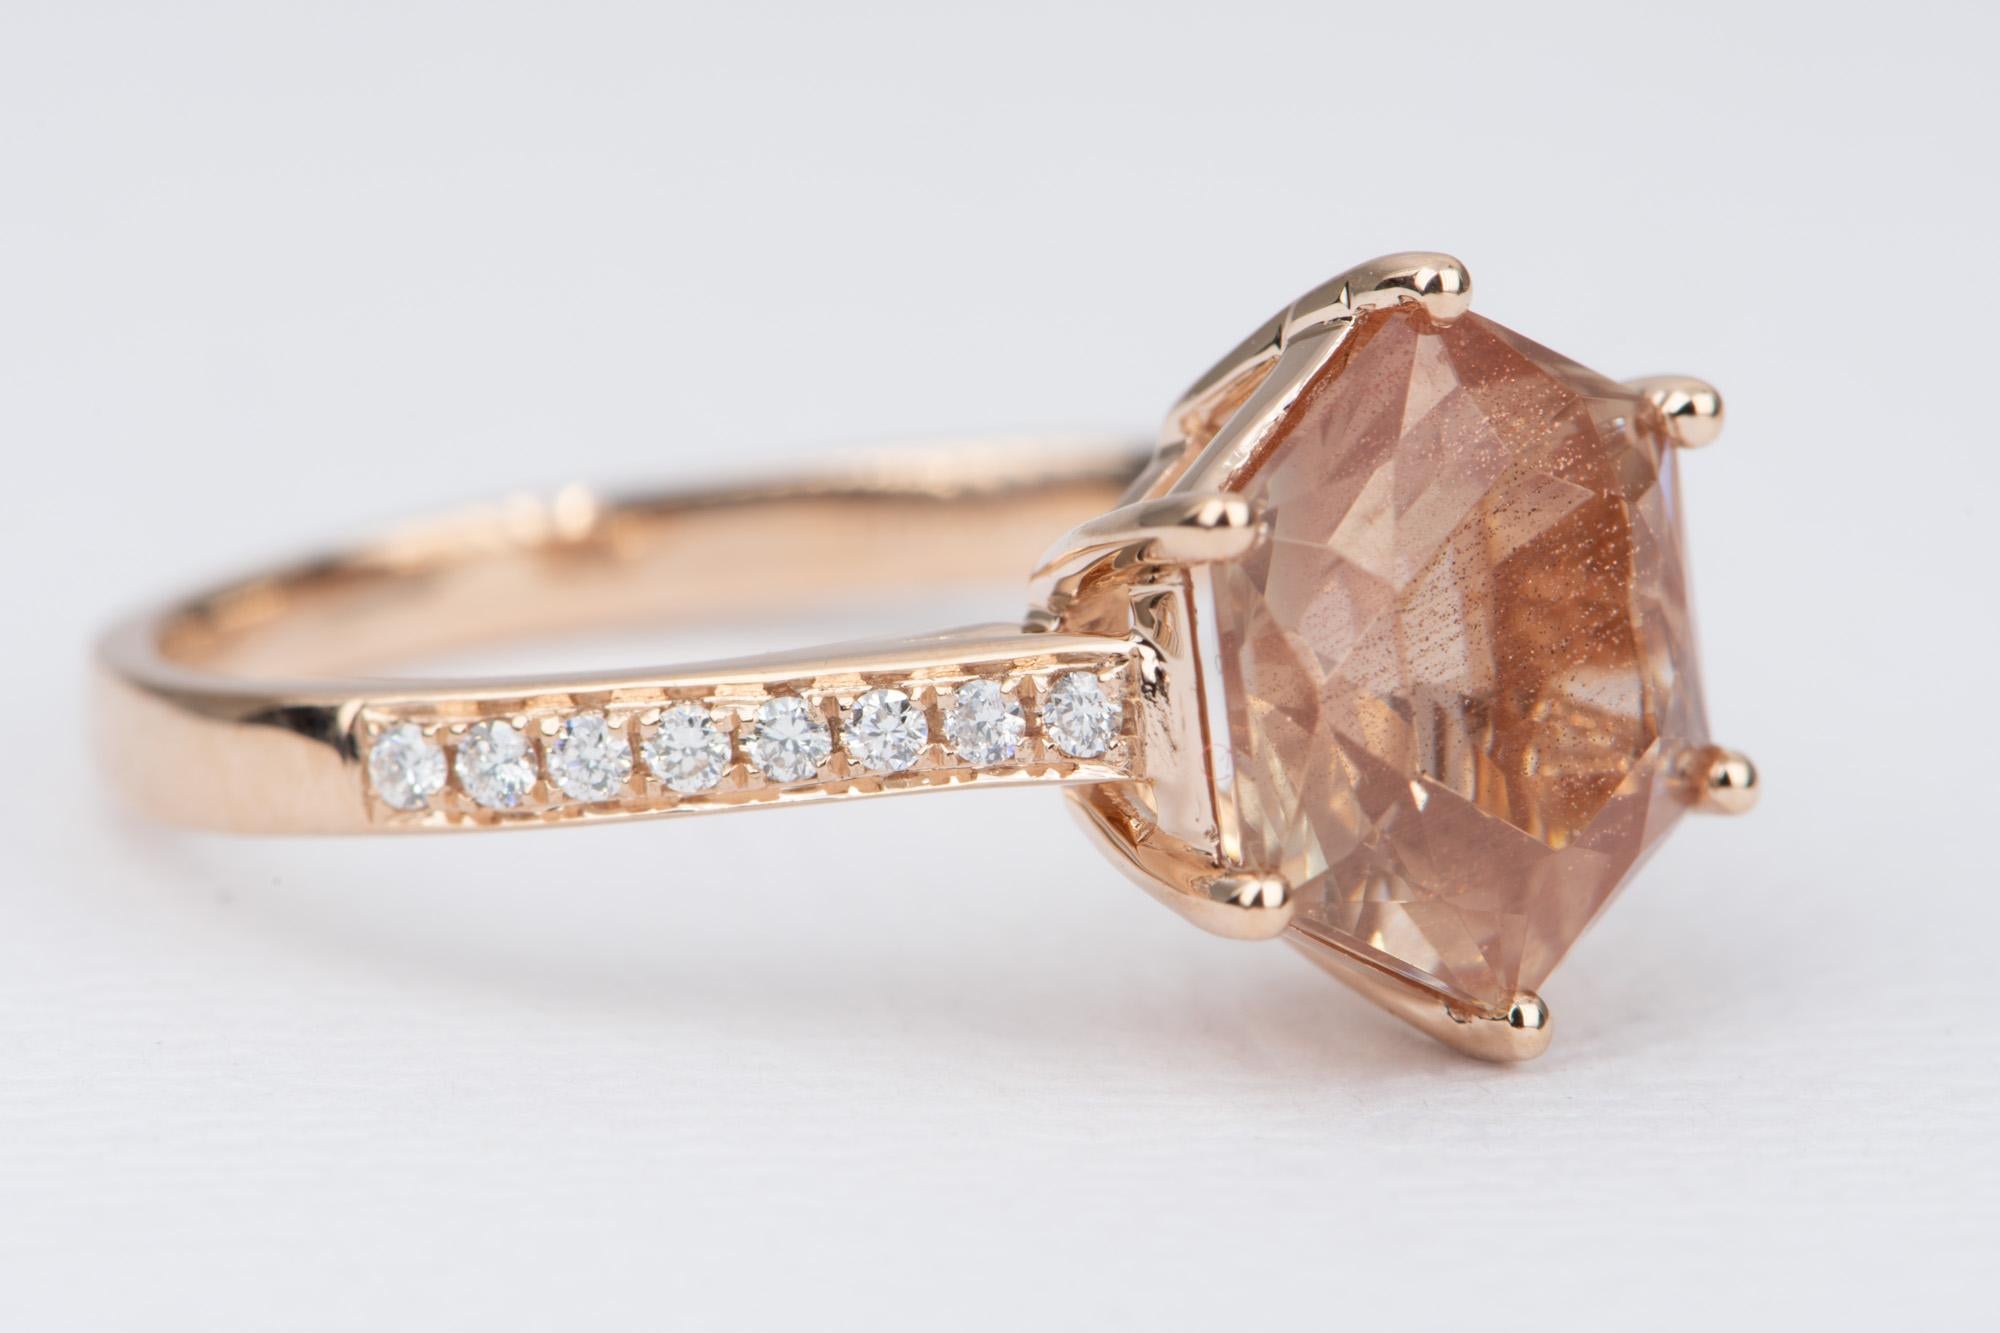 ♥  Solid 14K rose gold ring set with a hexagon-shaped Oregon sunstone center, with a half eternity diamond pave band
♥  The overall setting measures 9.9mm wide, 11.3 in length, and sits 6.8mm tall from the finger

♥  Ring size: US Size 7 (Free